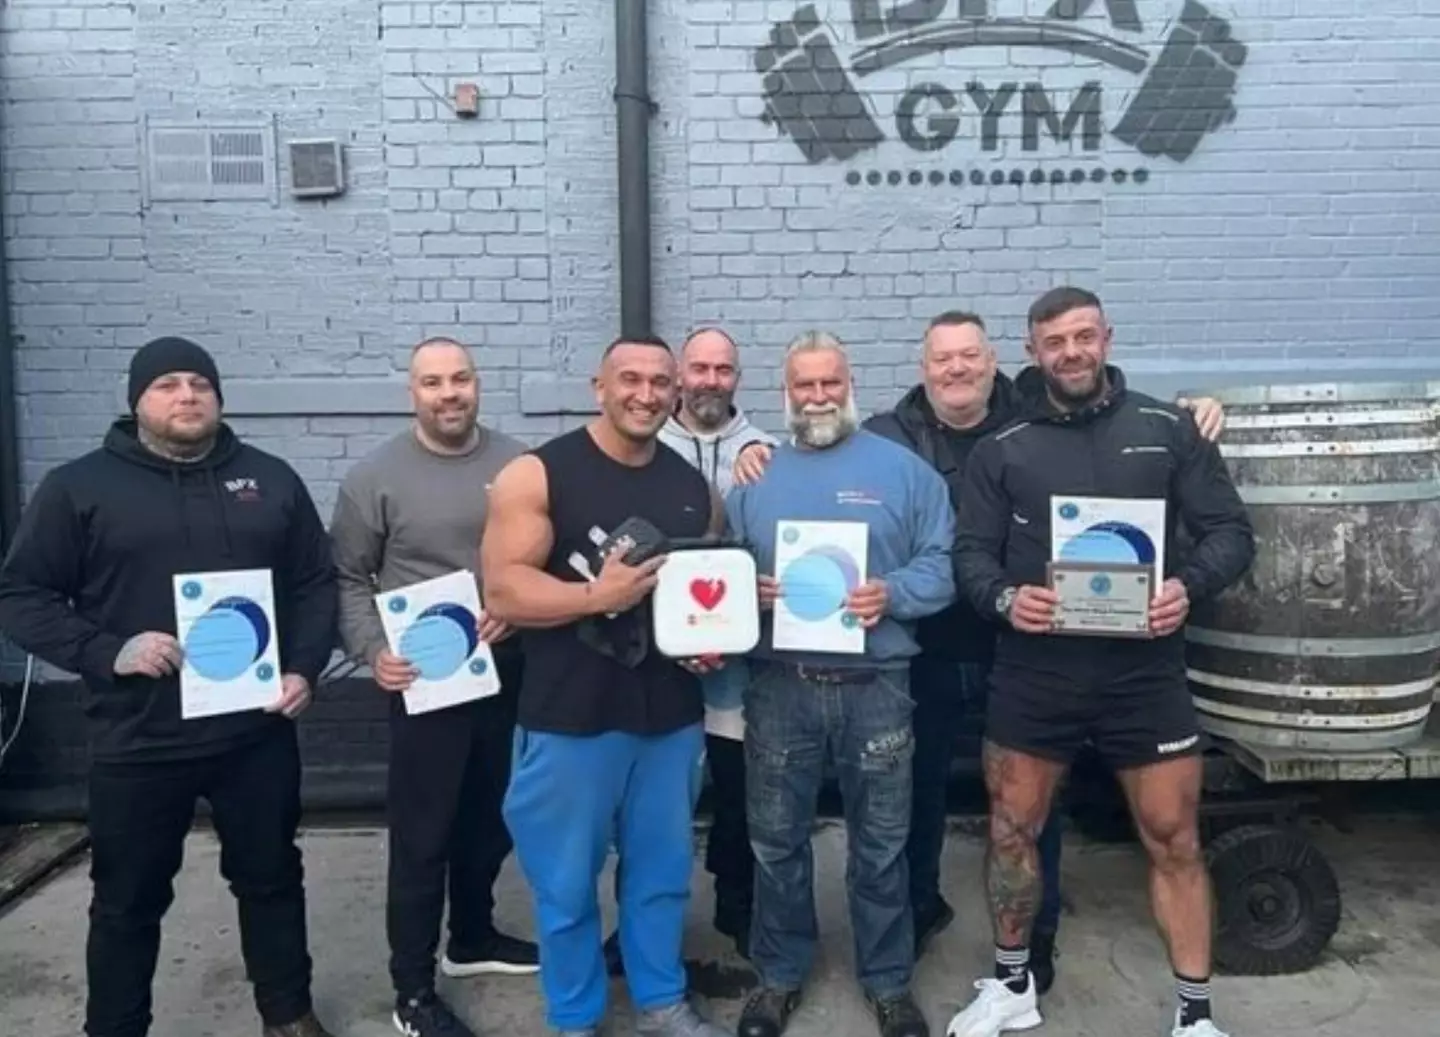 The gym has now installed a defibrillator following Martin's death.